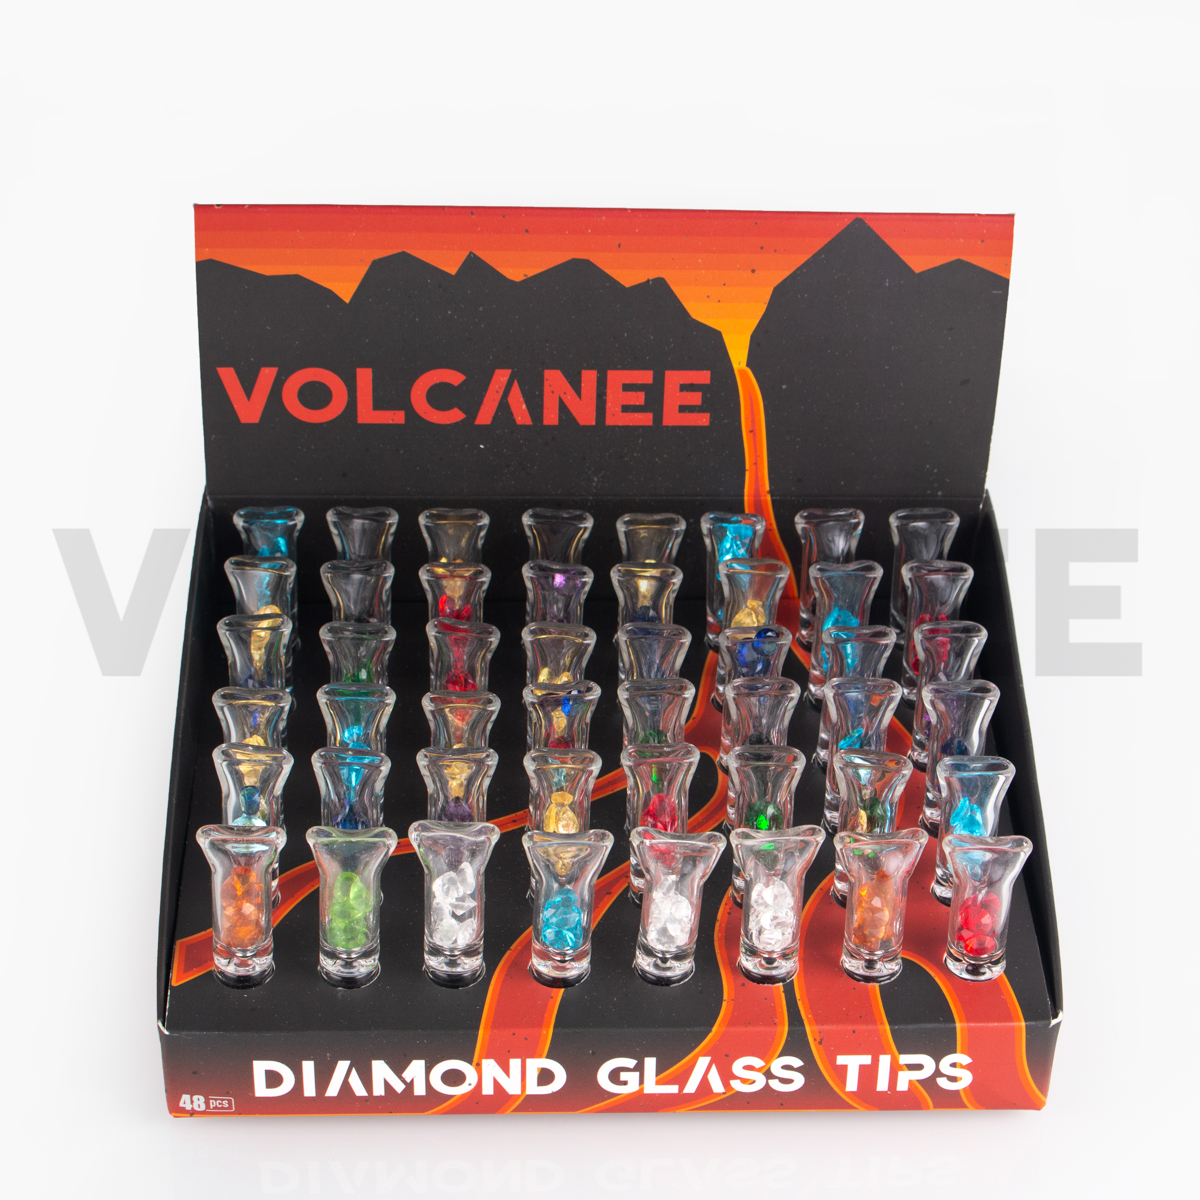 Diamond Glass Filter Tips with display box,
48pcs/display box,
24 display box/carton,
.
.
.
.
.
.
.
.
#volcanee#joints #blunt #cannabisculture #cannabiscommunity #blunts #bluntwraps #bluntculture #cannabis #cigar #glasstip #glasscrutch #glassfilter #glassfiltertip